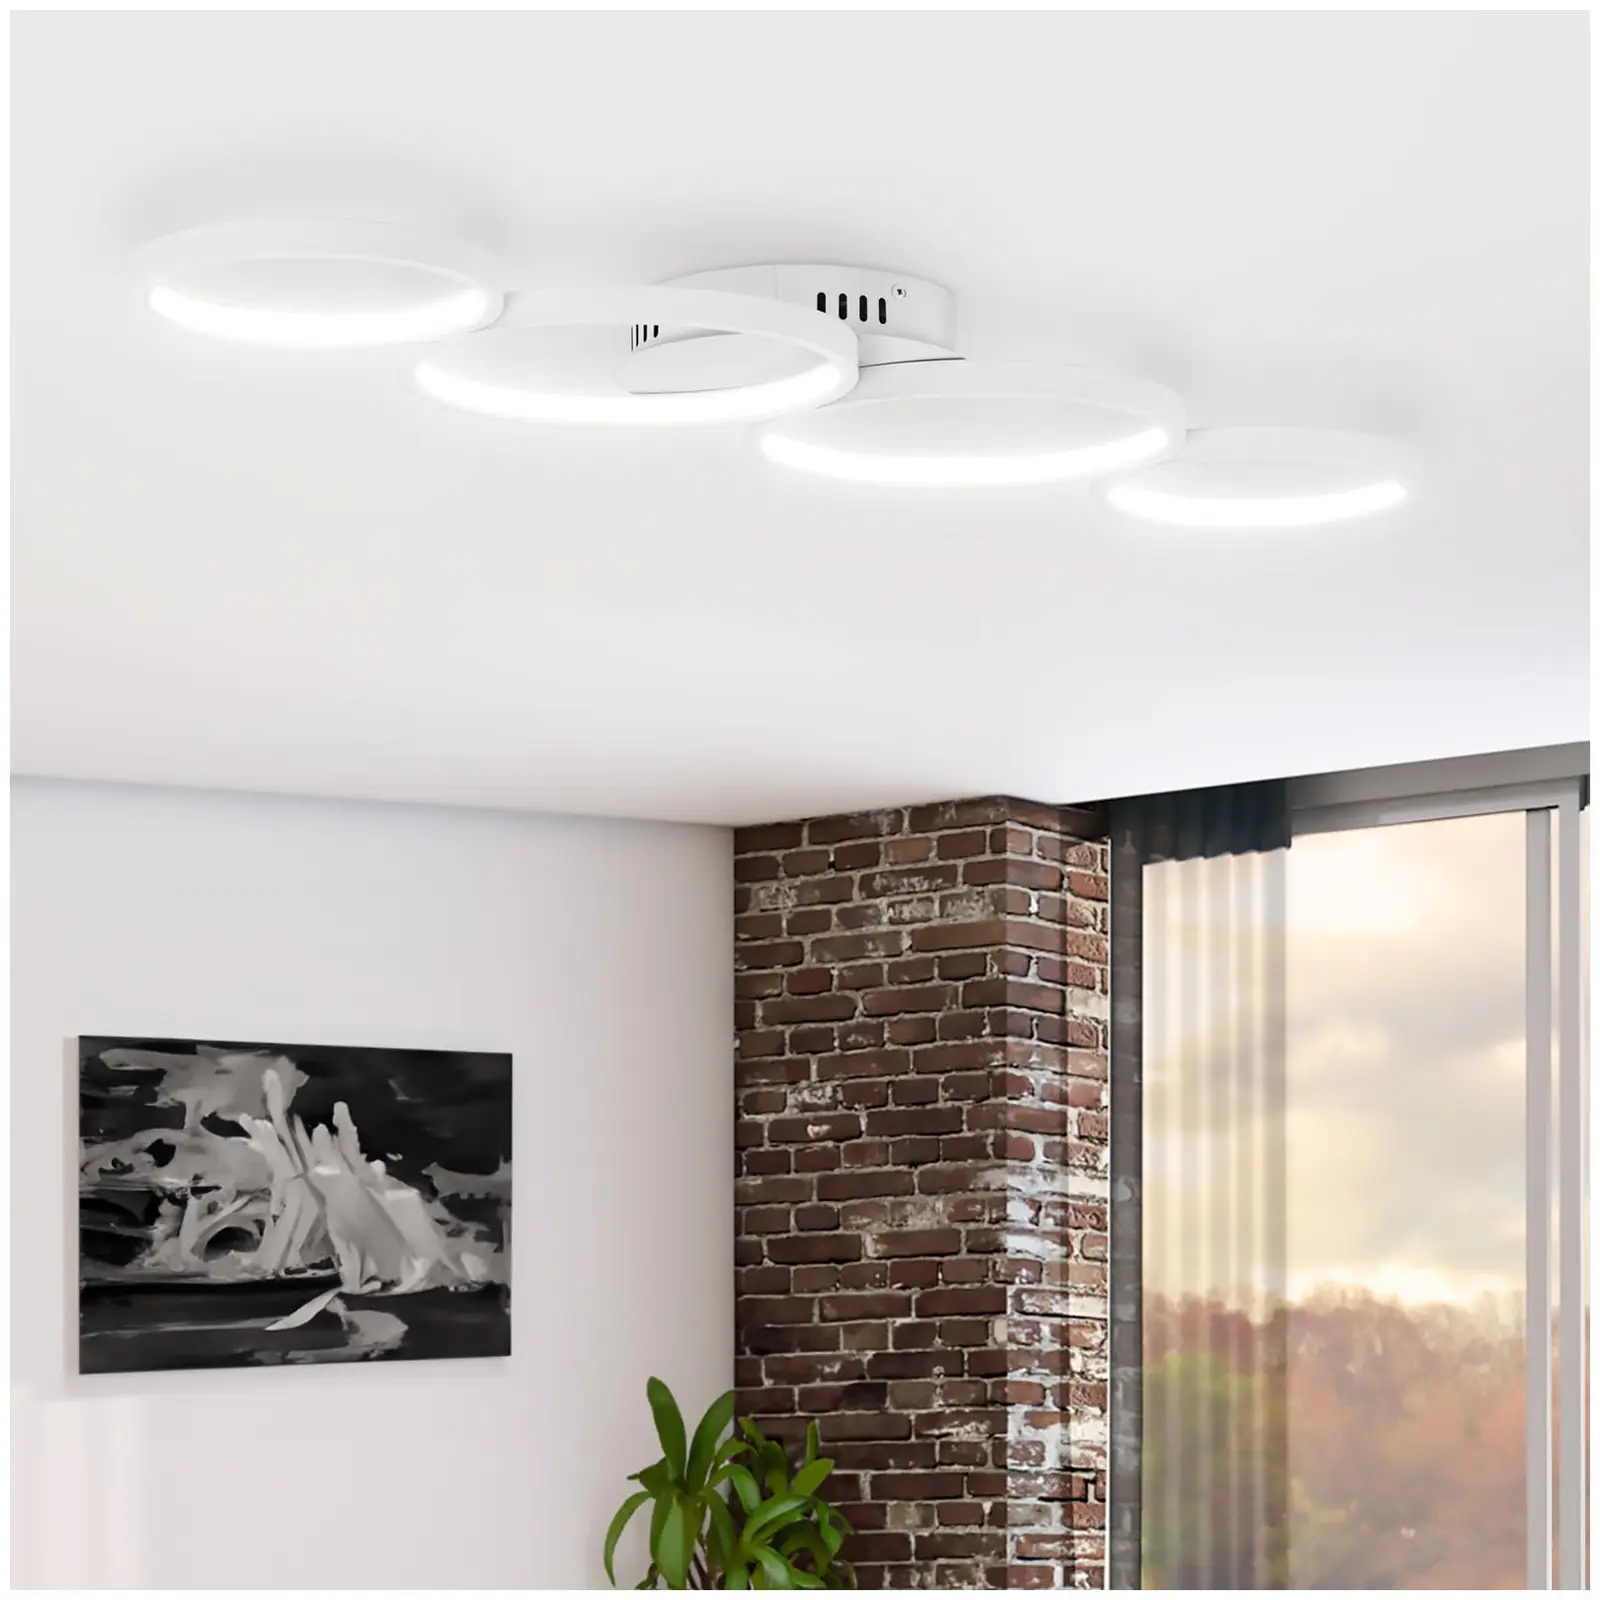 Ceiling Light - 4 circles - 50 W - remote control